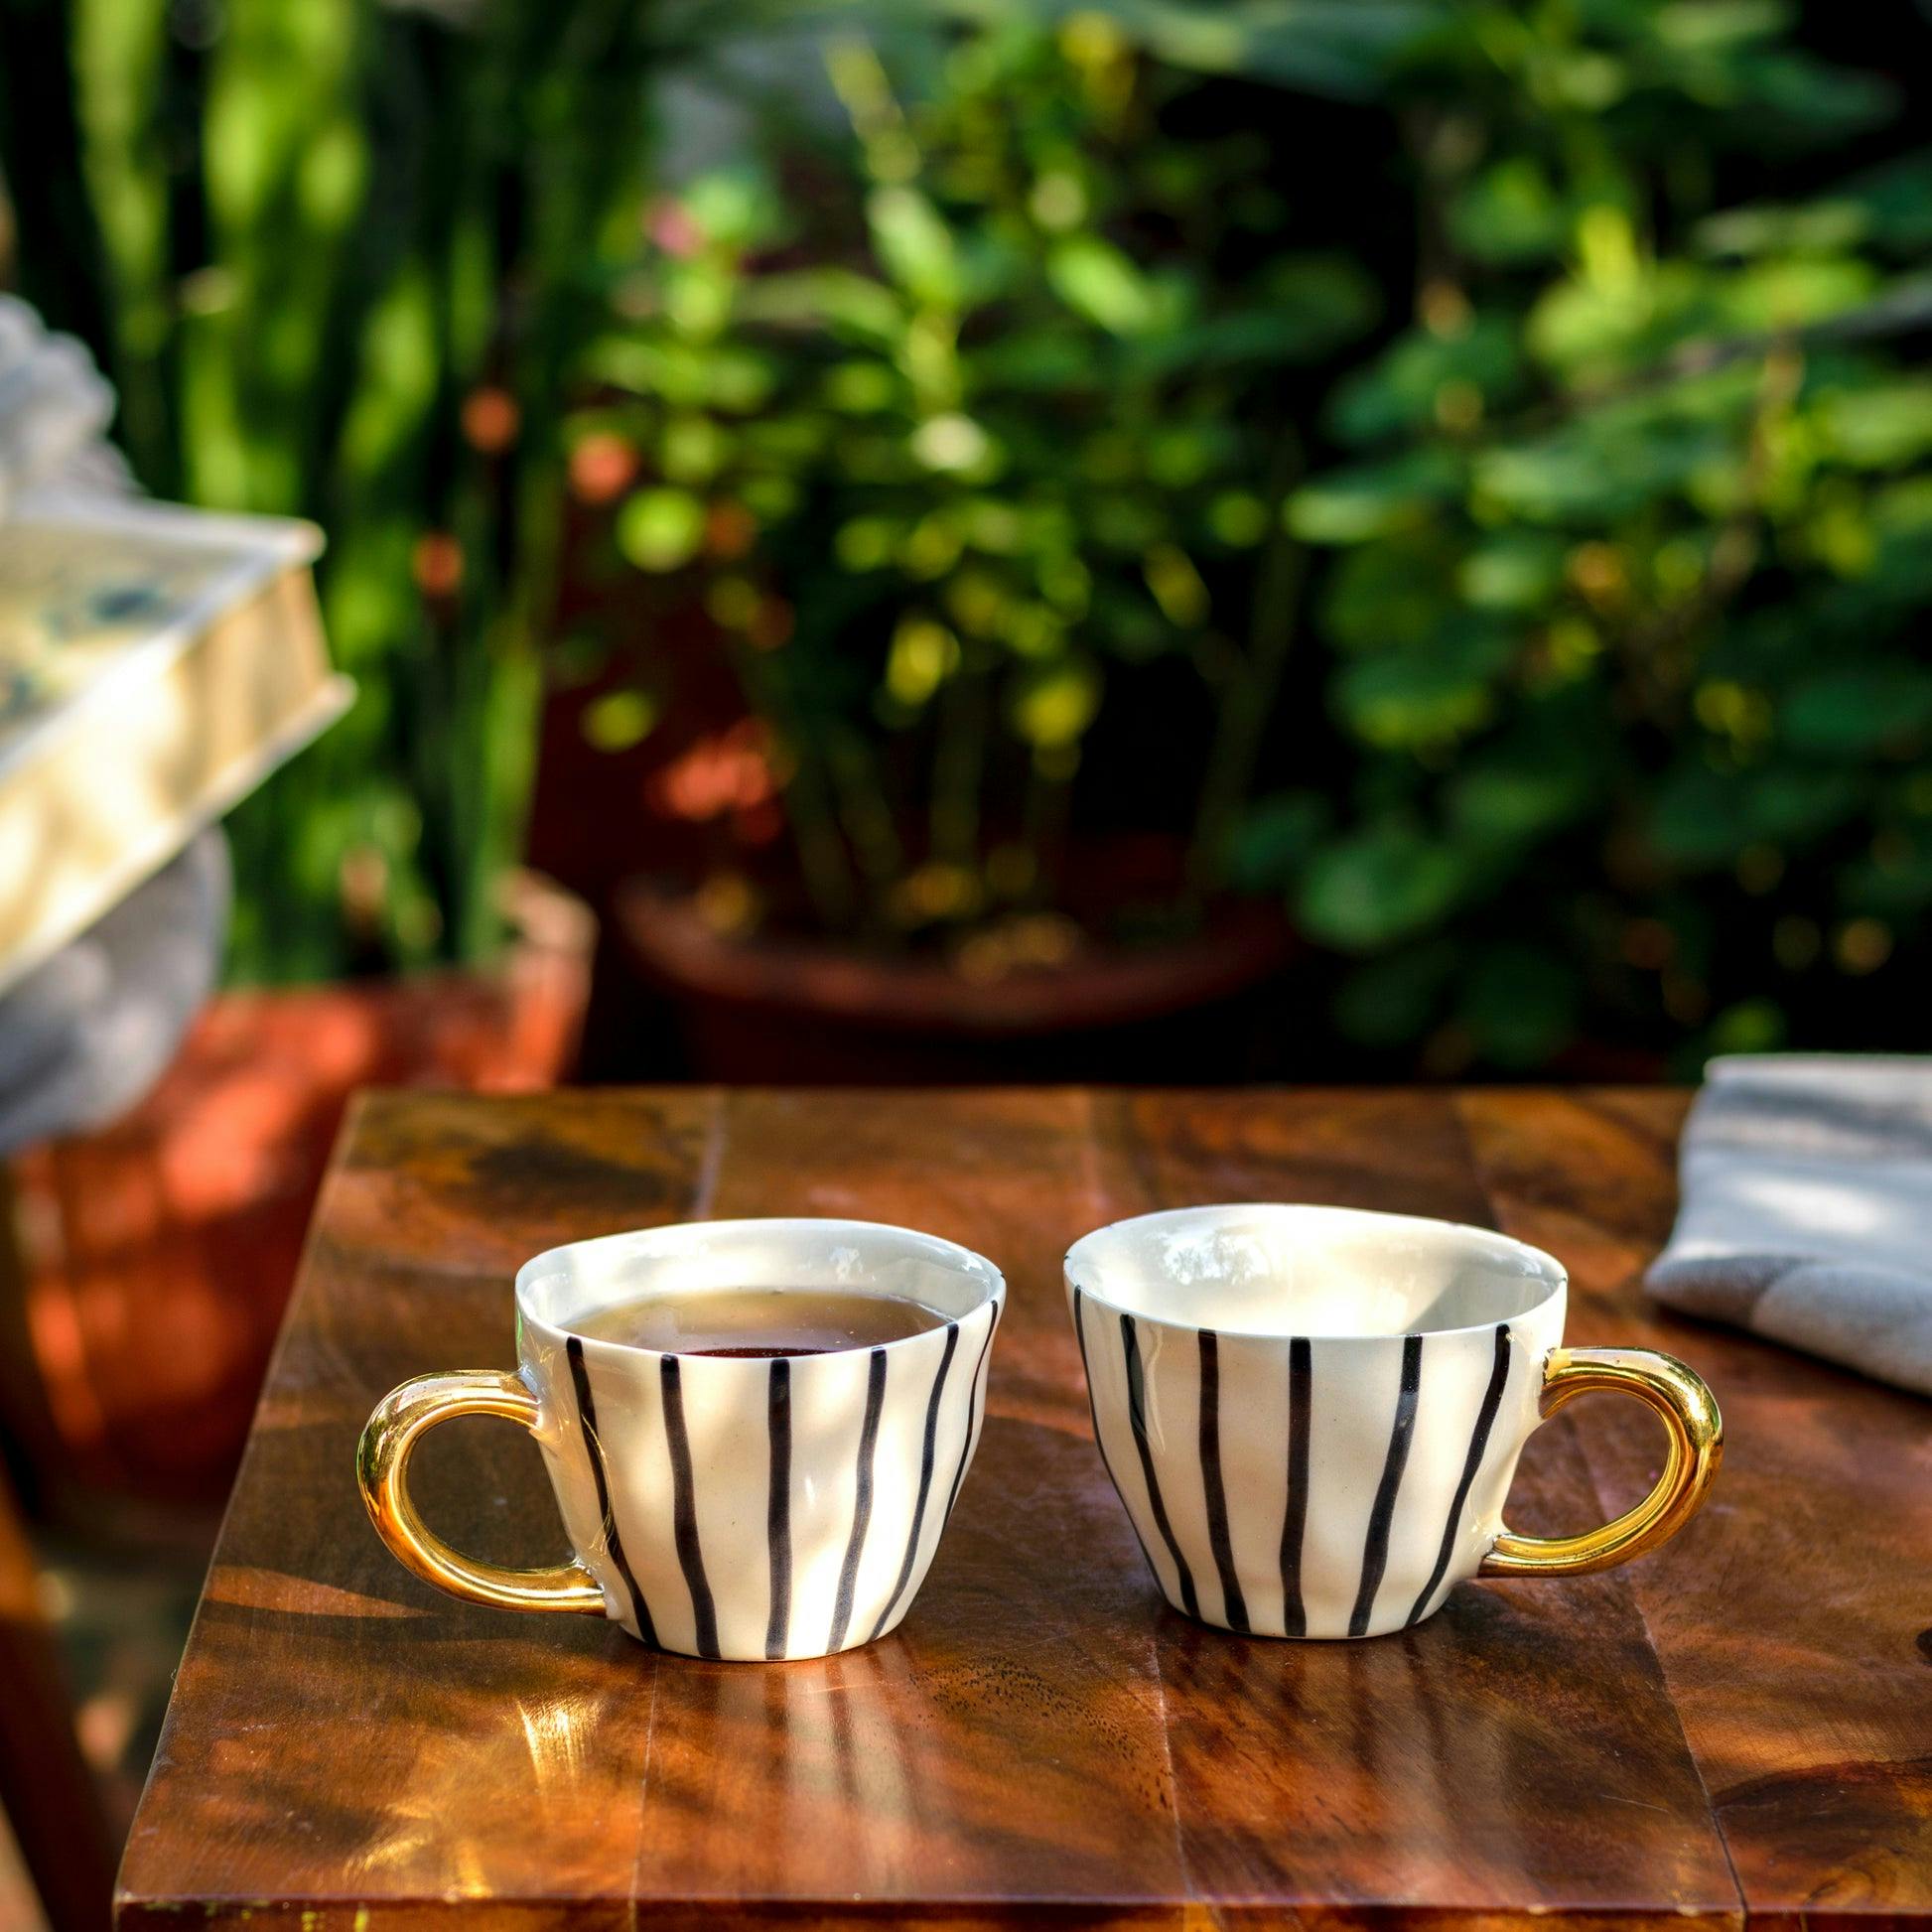 Stripe Hand Painted Mugs - Set of 2, a product by Oh Yay project